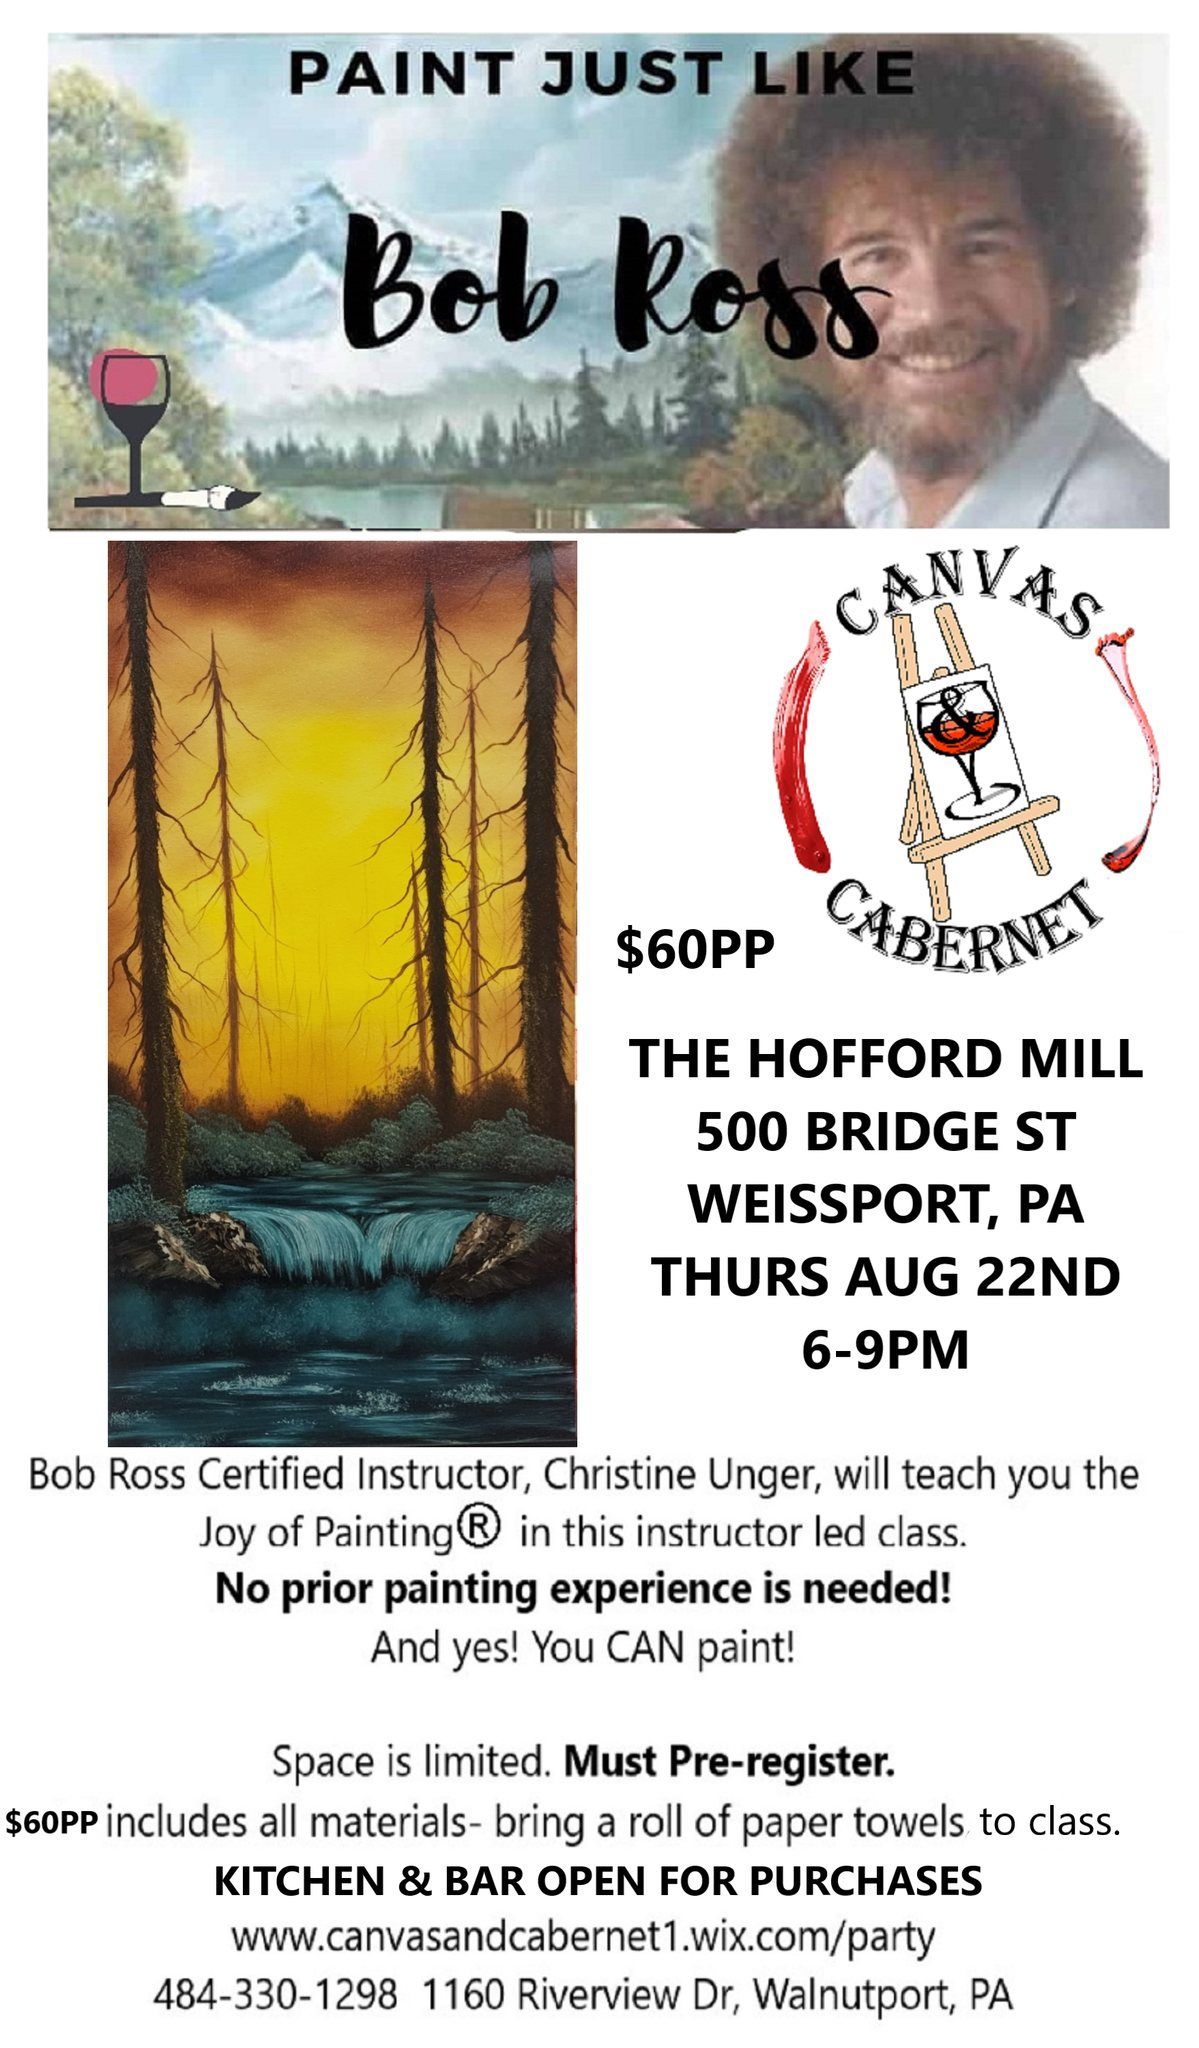 Paint like Bob Ross at The Hofford Mill